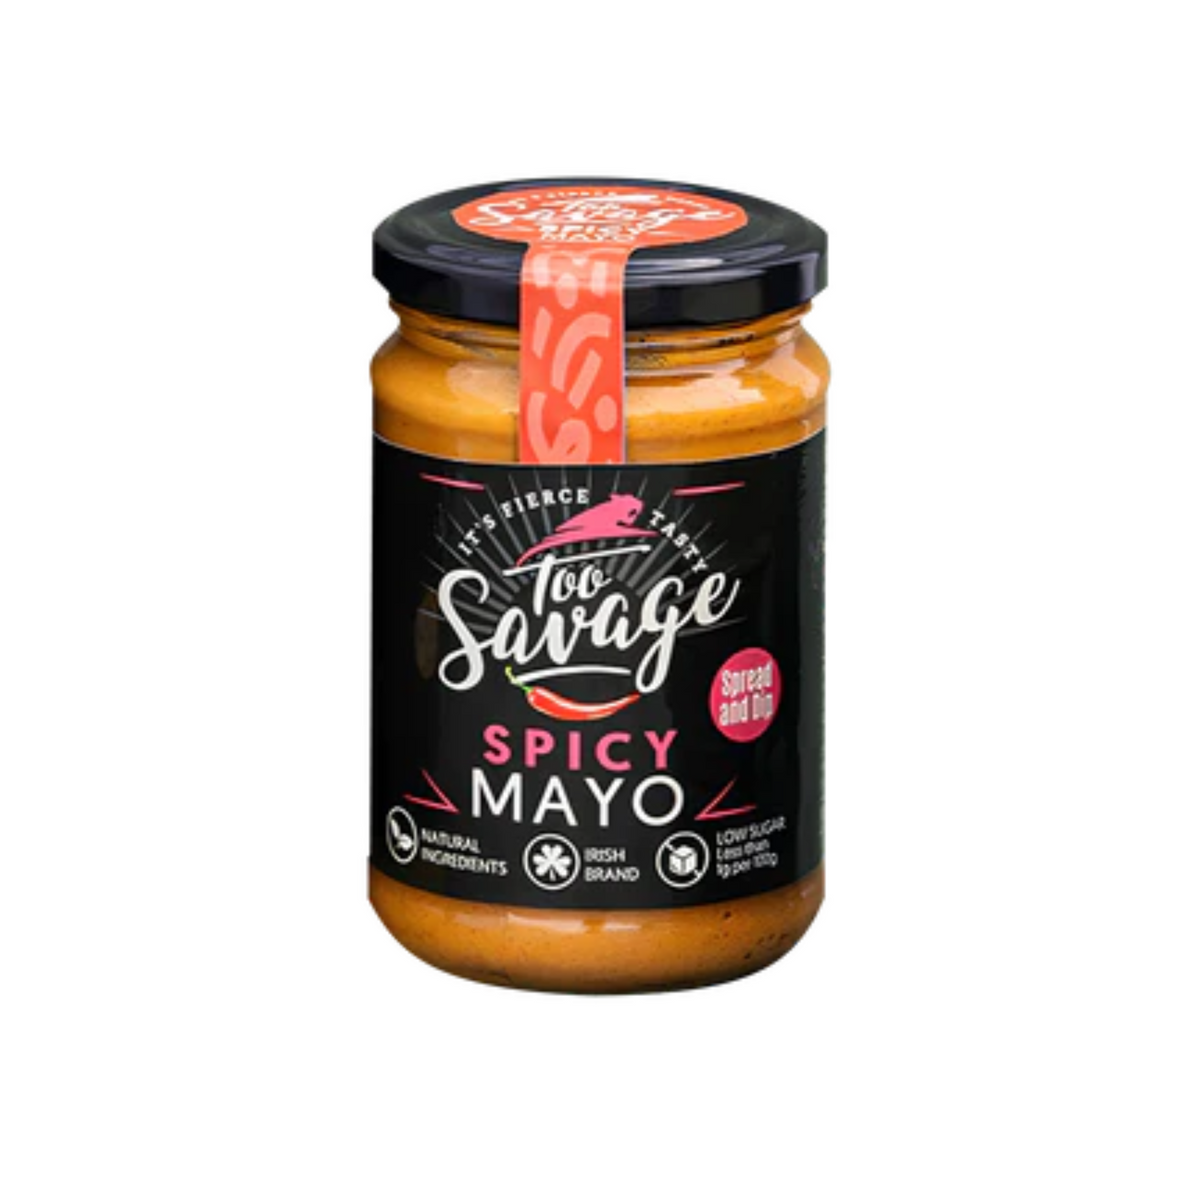 Too Savage Spicy Mayo 250g